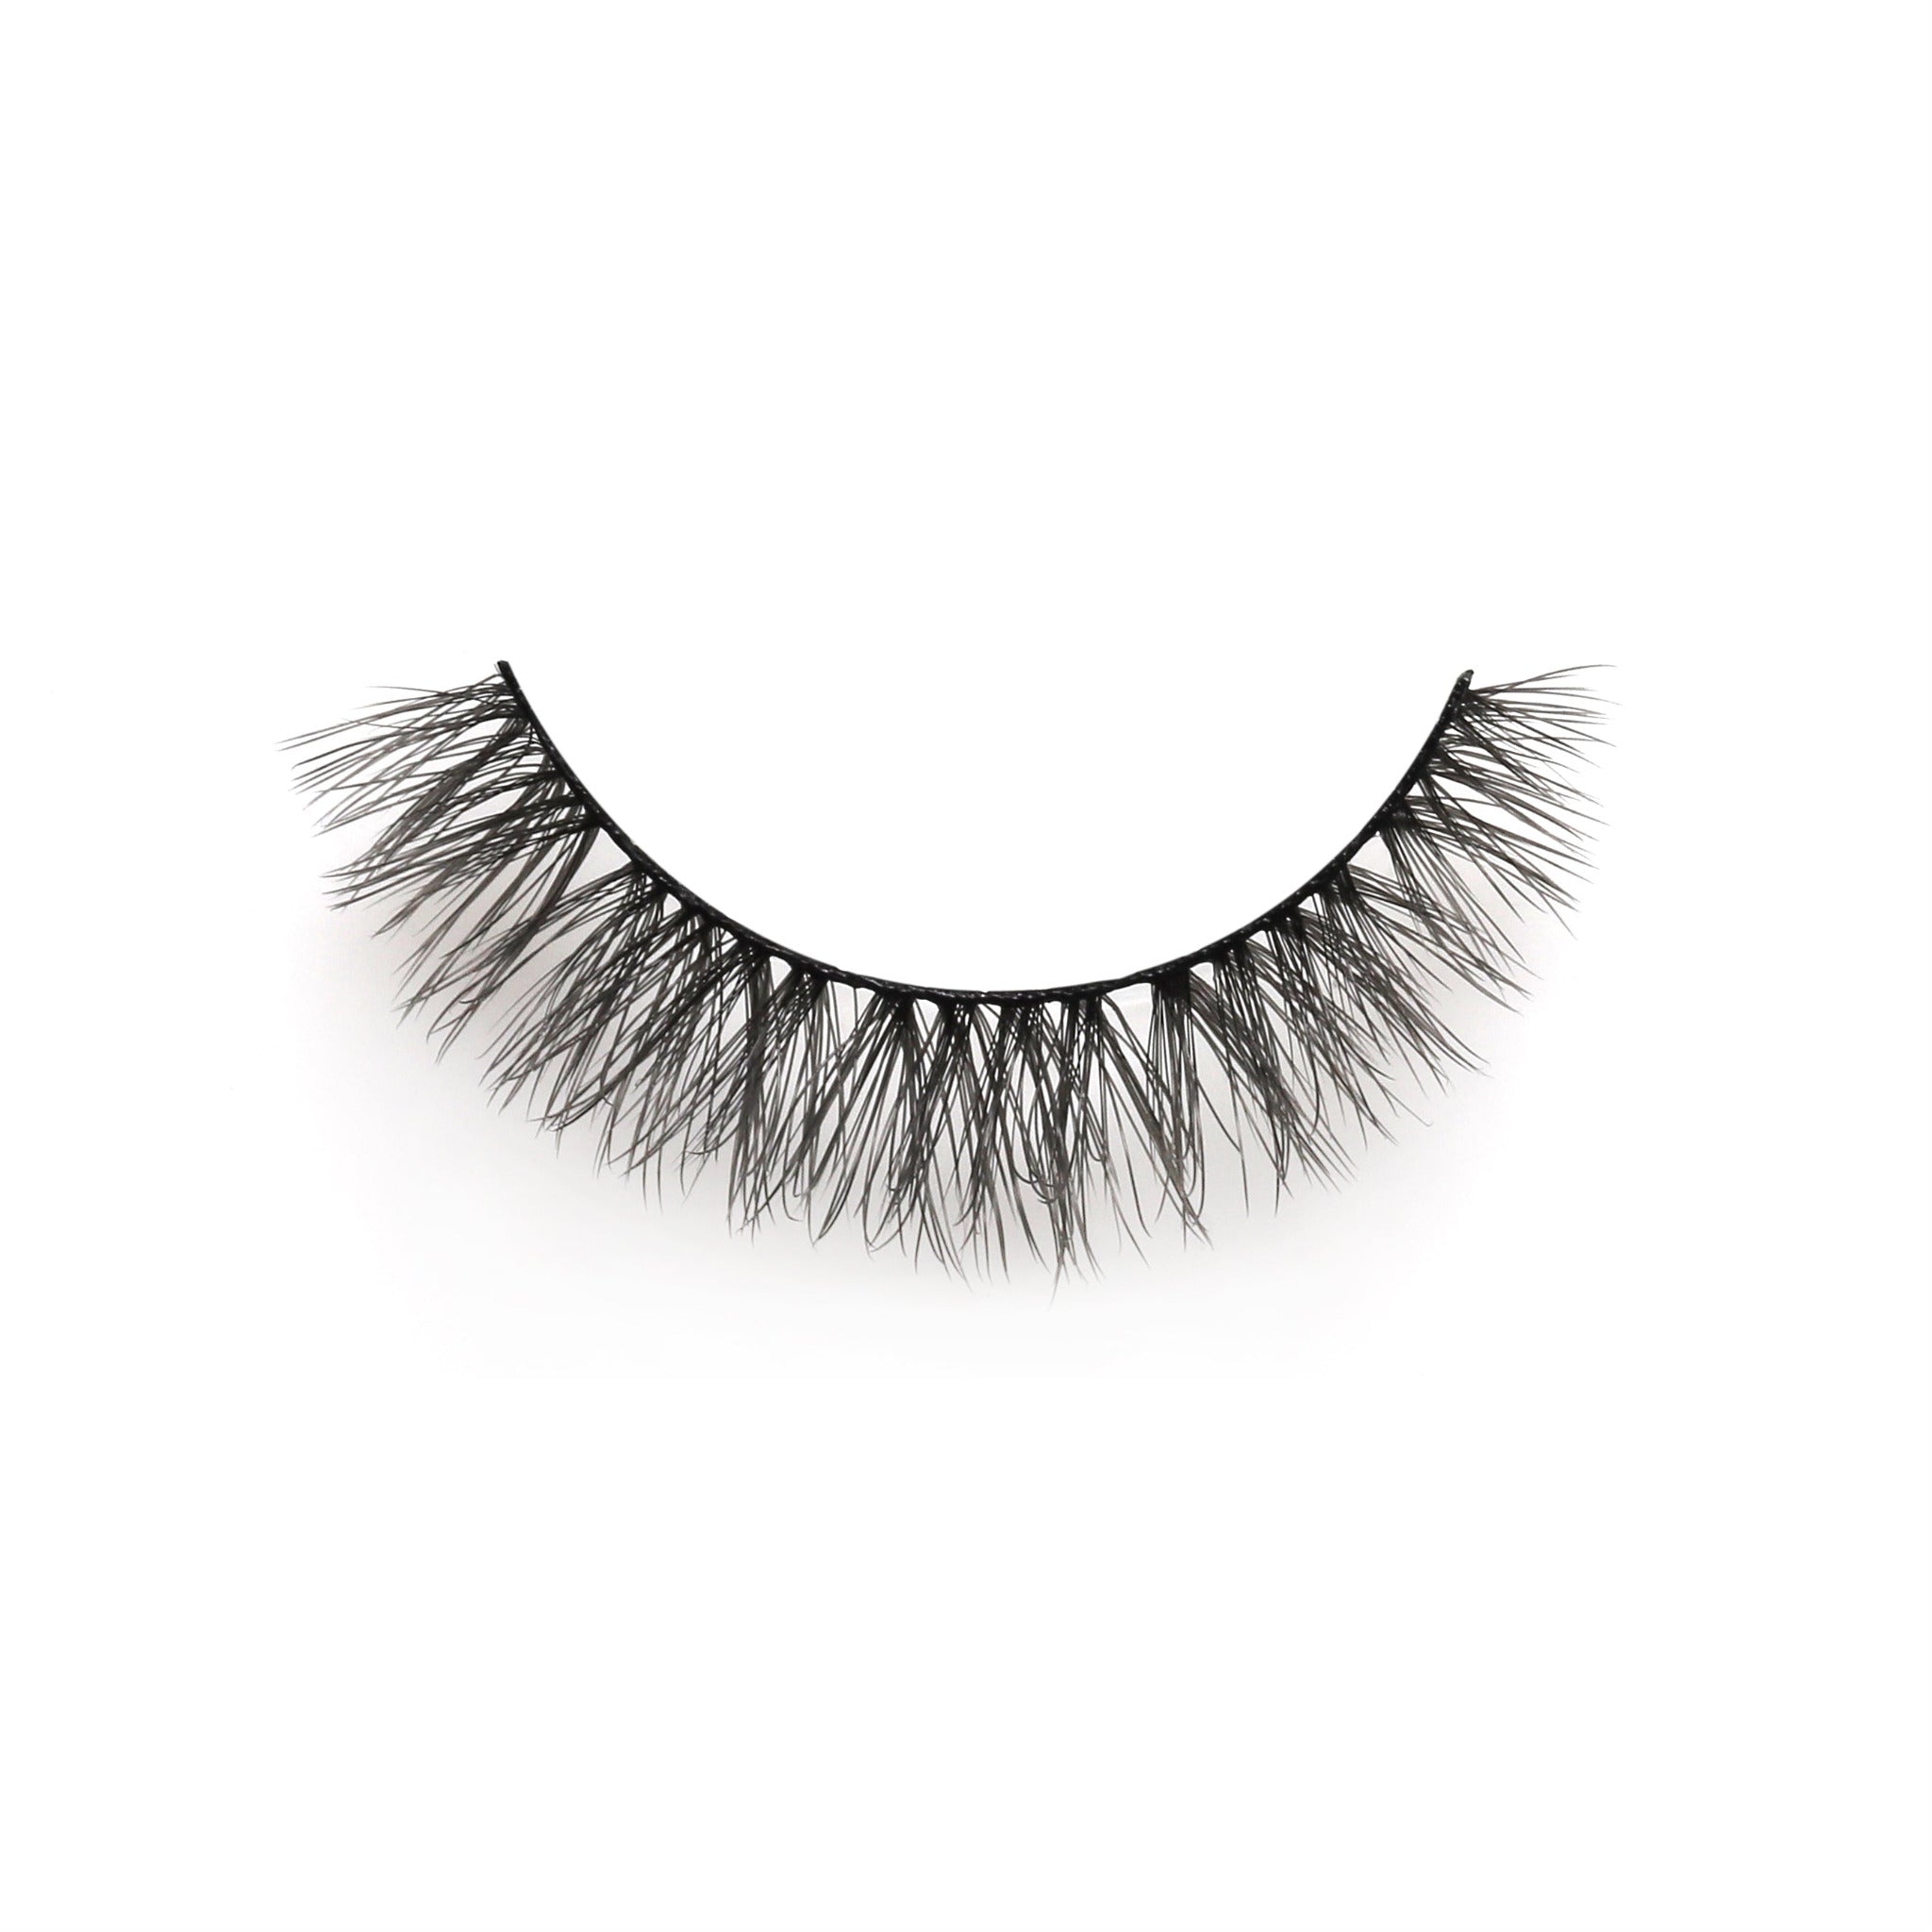 natural style lash strips, fluffy lash strips, fluffy lashes, strip lashes, false eyelashes, natural strip lash look, high quality strip lashes, volume style strip lashes, luxurious strip lashes, Biodegradable lashes, short lashes, full and short lash strips